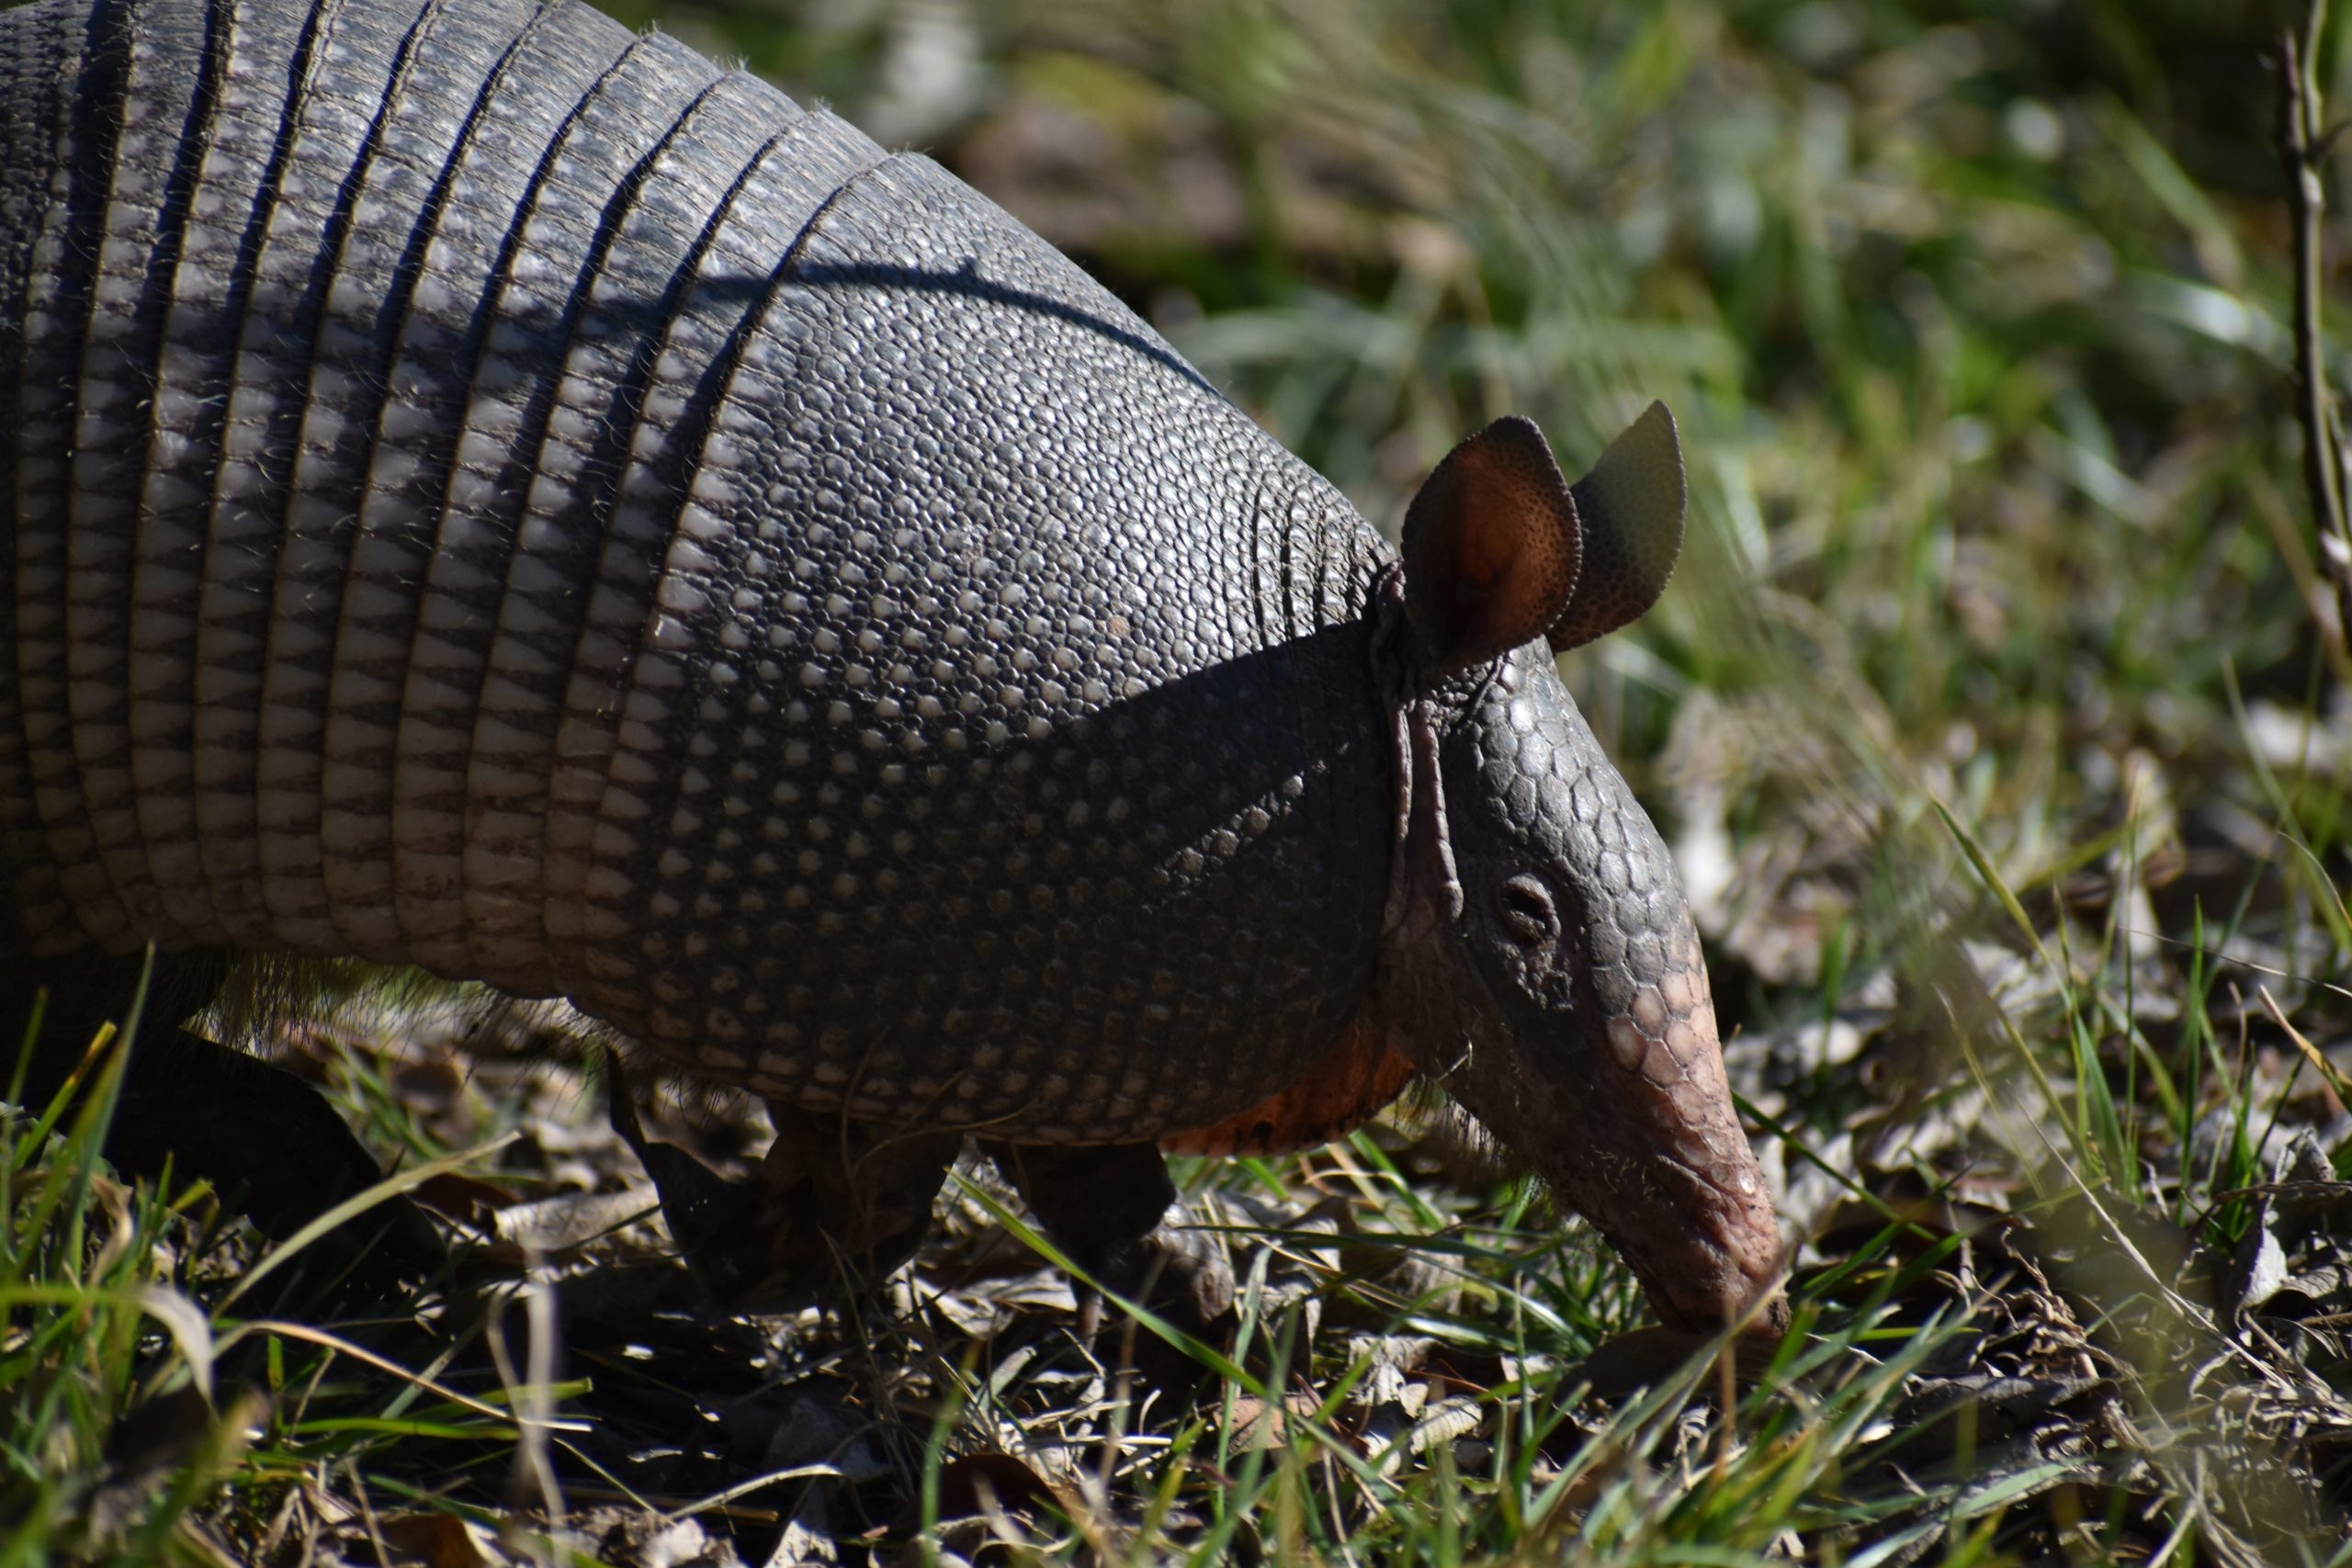 Get to know the Giant Armadillo